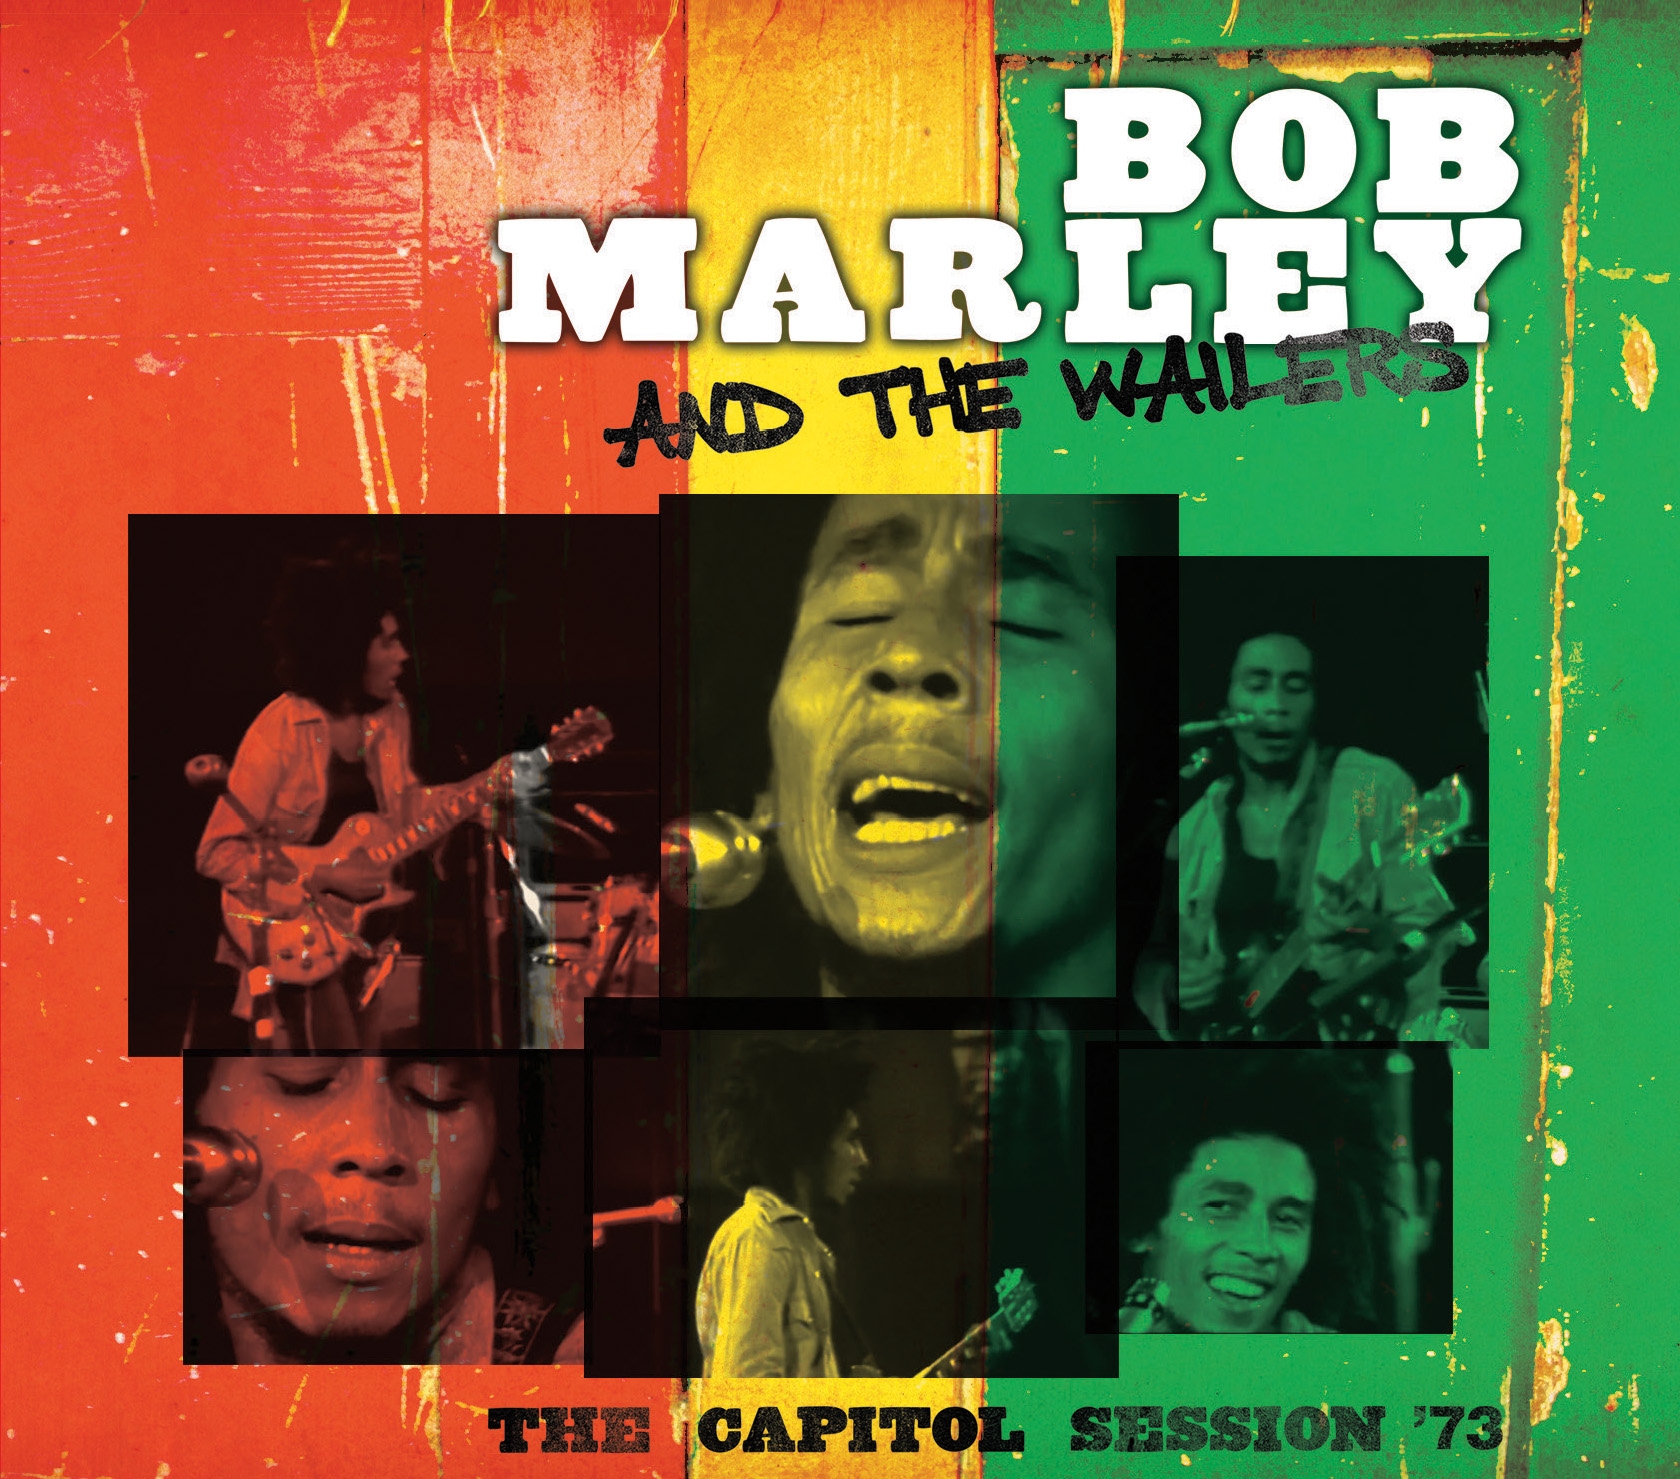 Review: 'Bob Marley: One Love' doesn't stir - ABC News